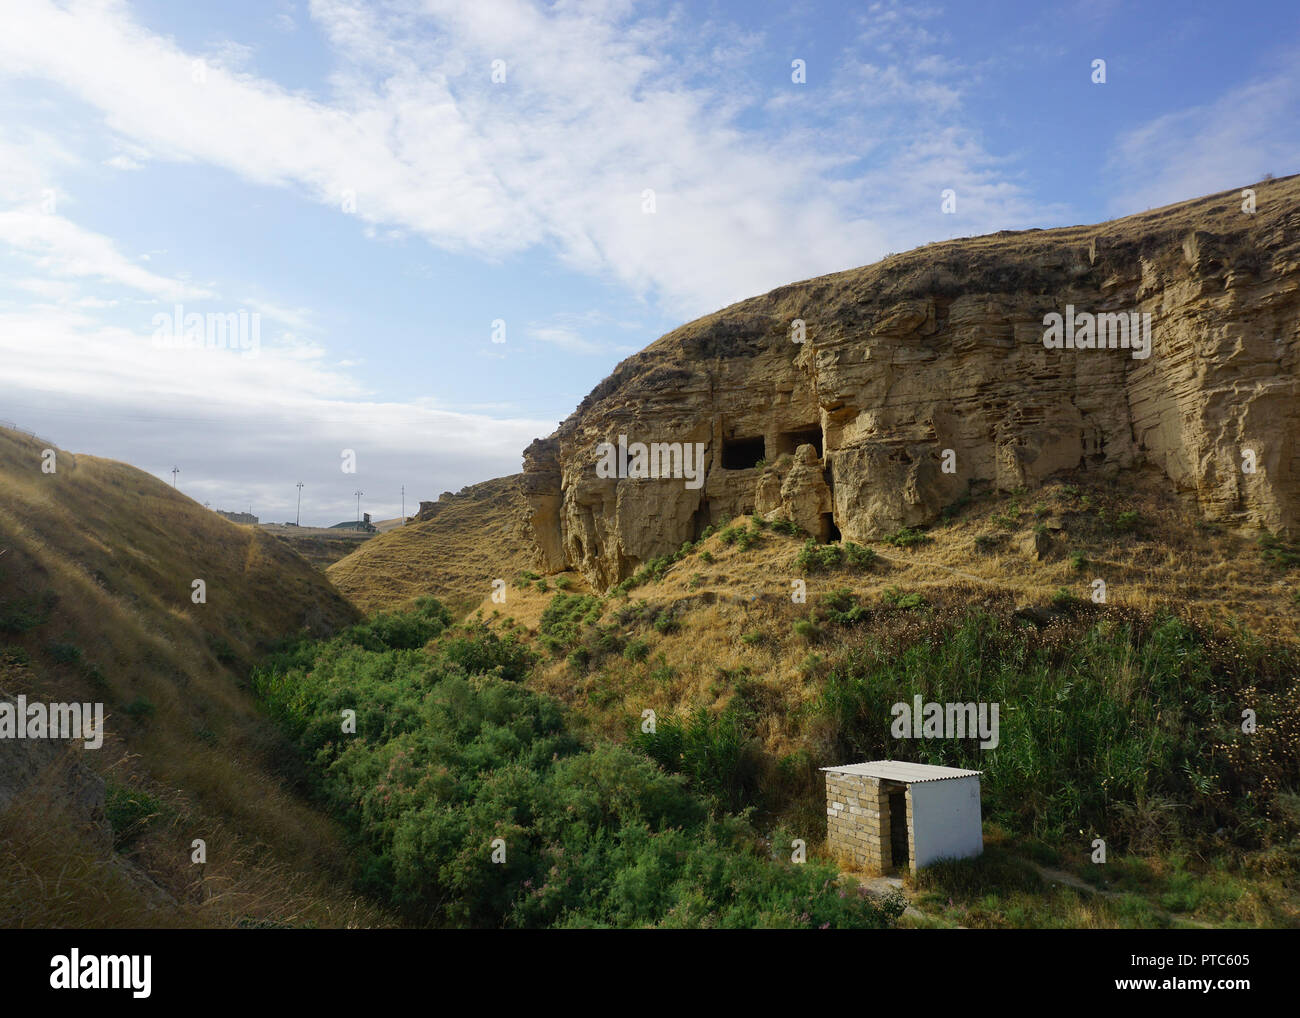 Diri Baba Grotto Caves carved in Massif with Public Toilet Stock Photo